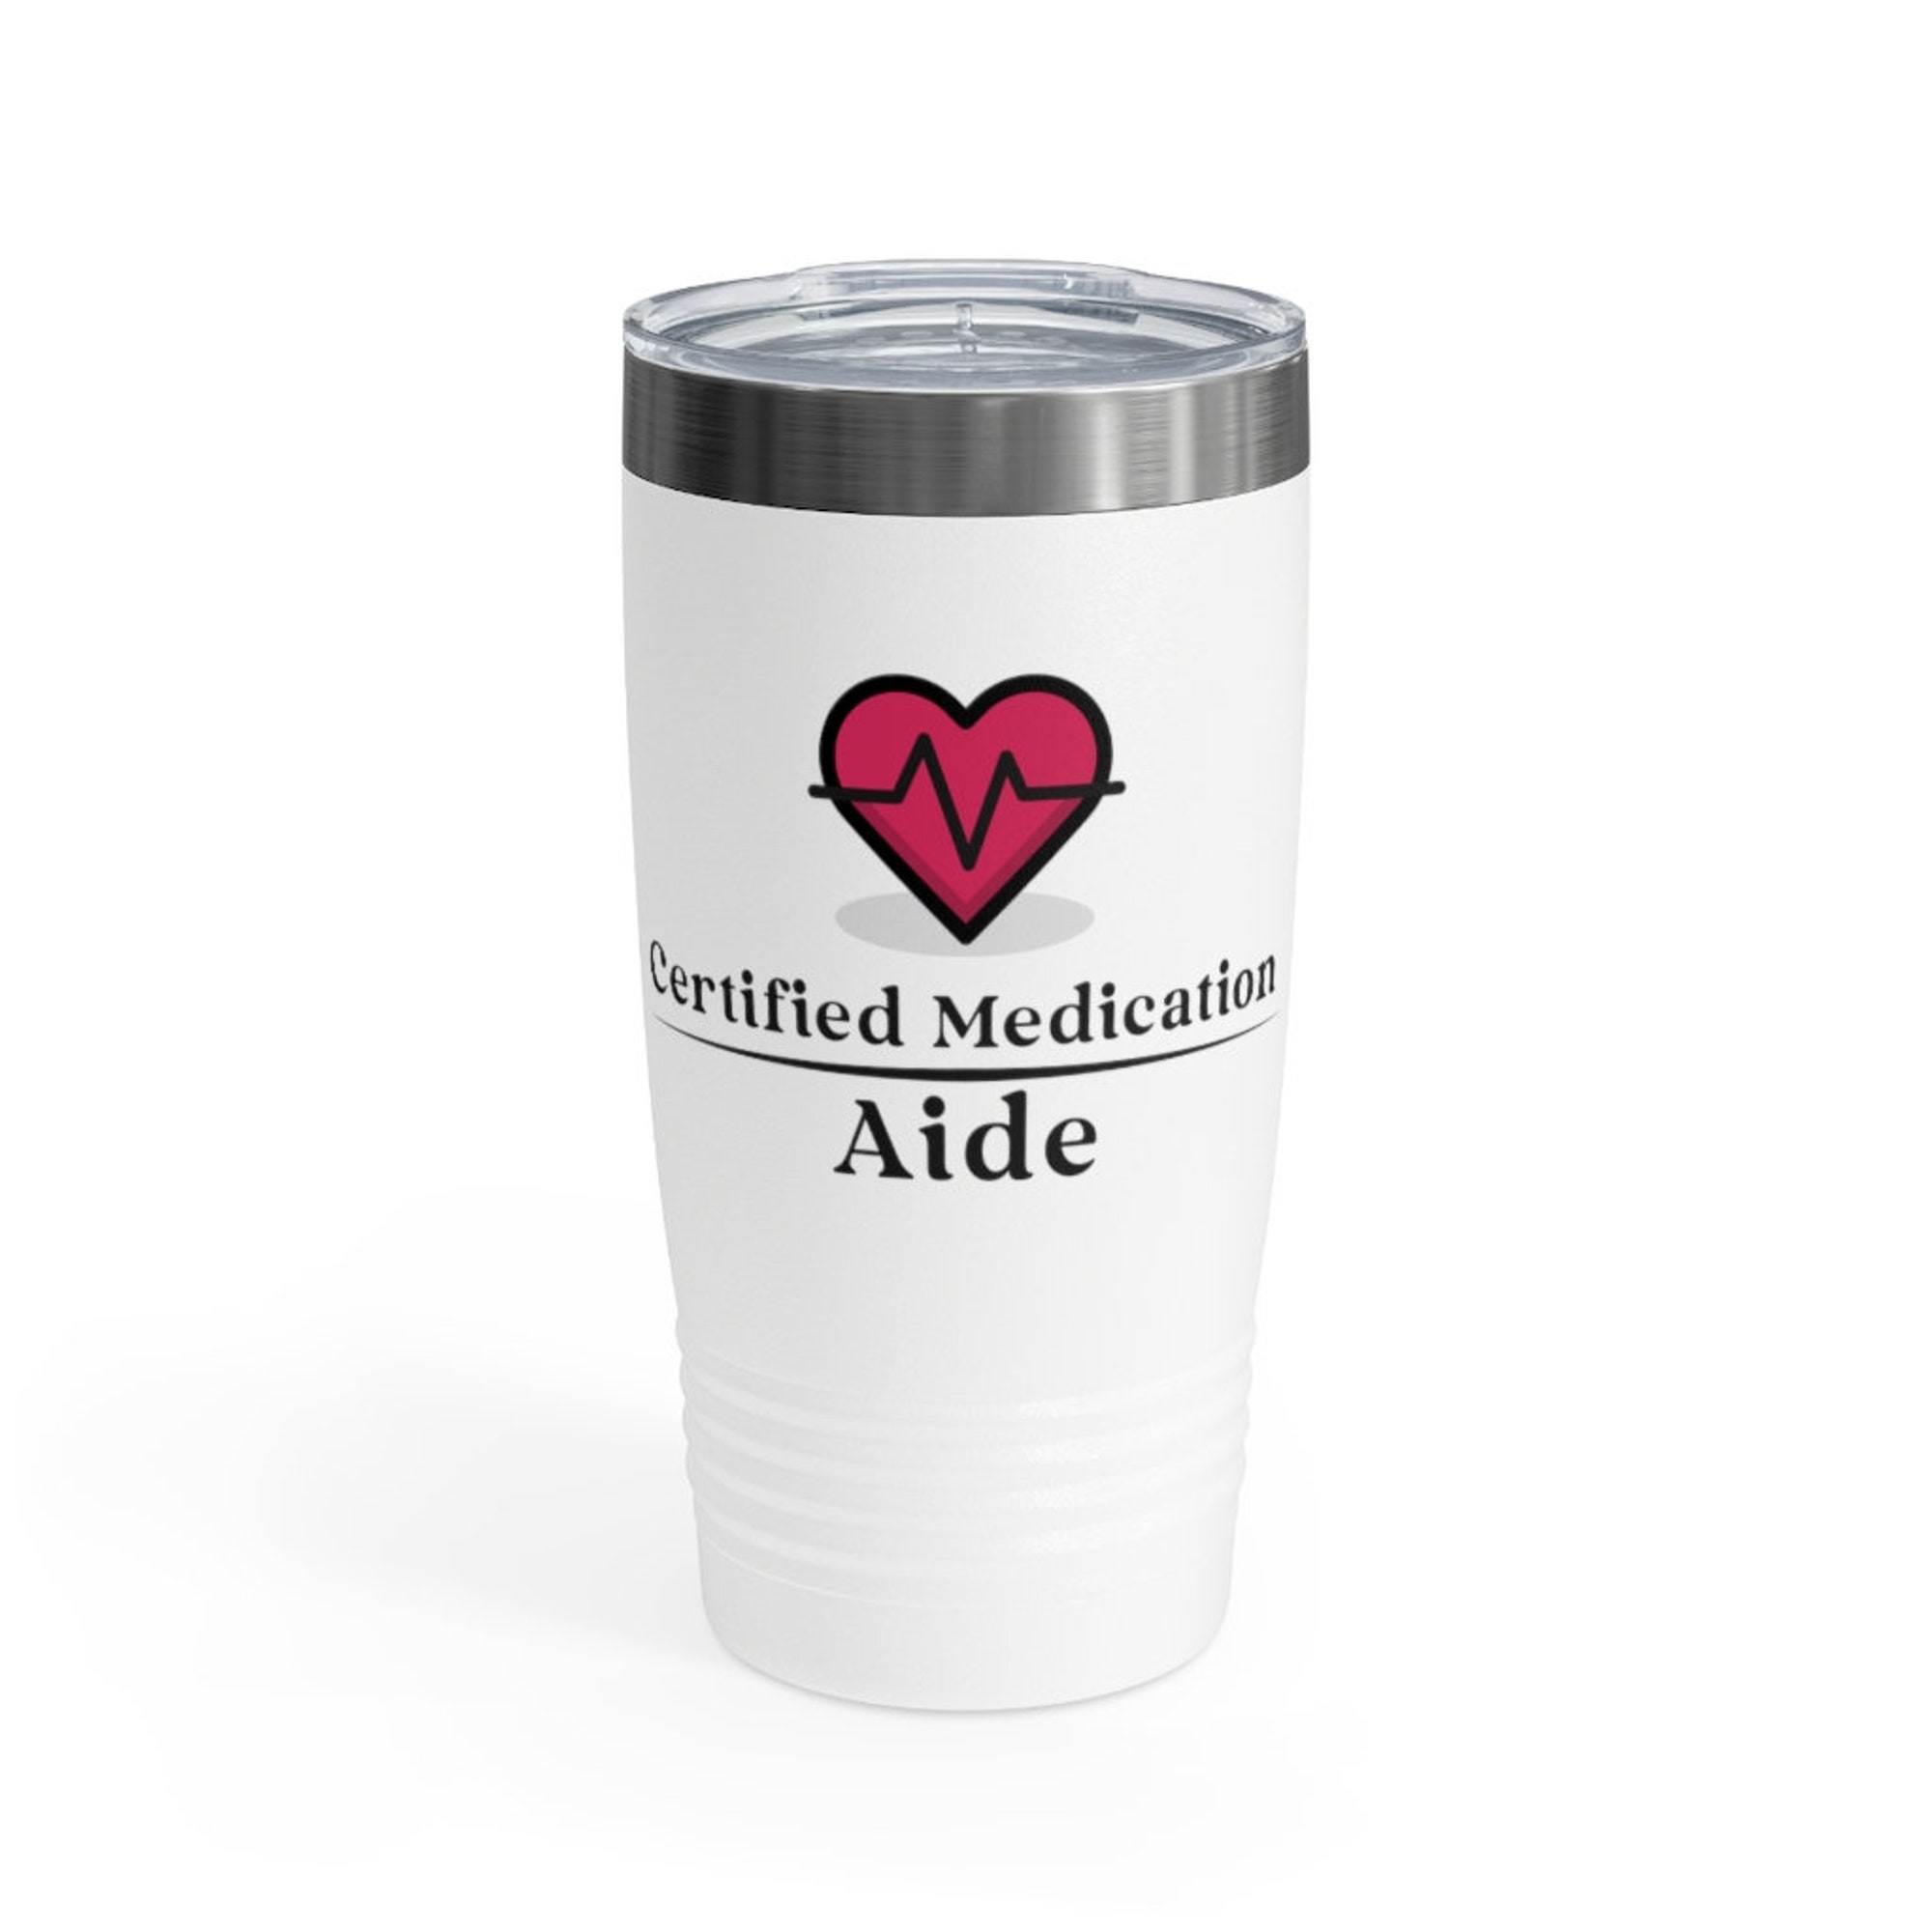 Discover Certified Medication Aide Ringneck Tumbler